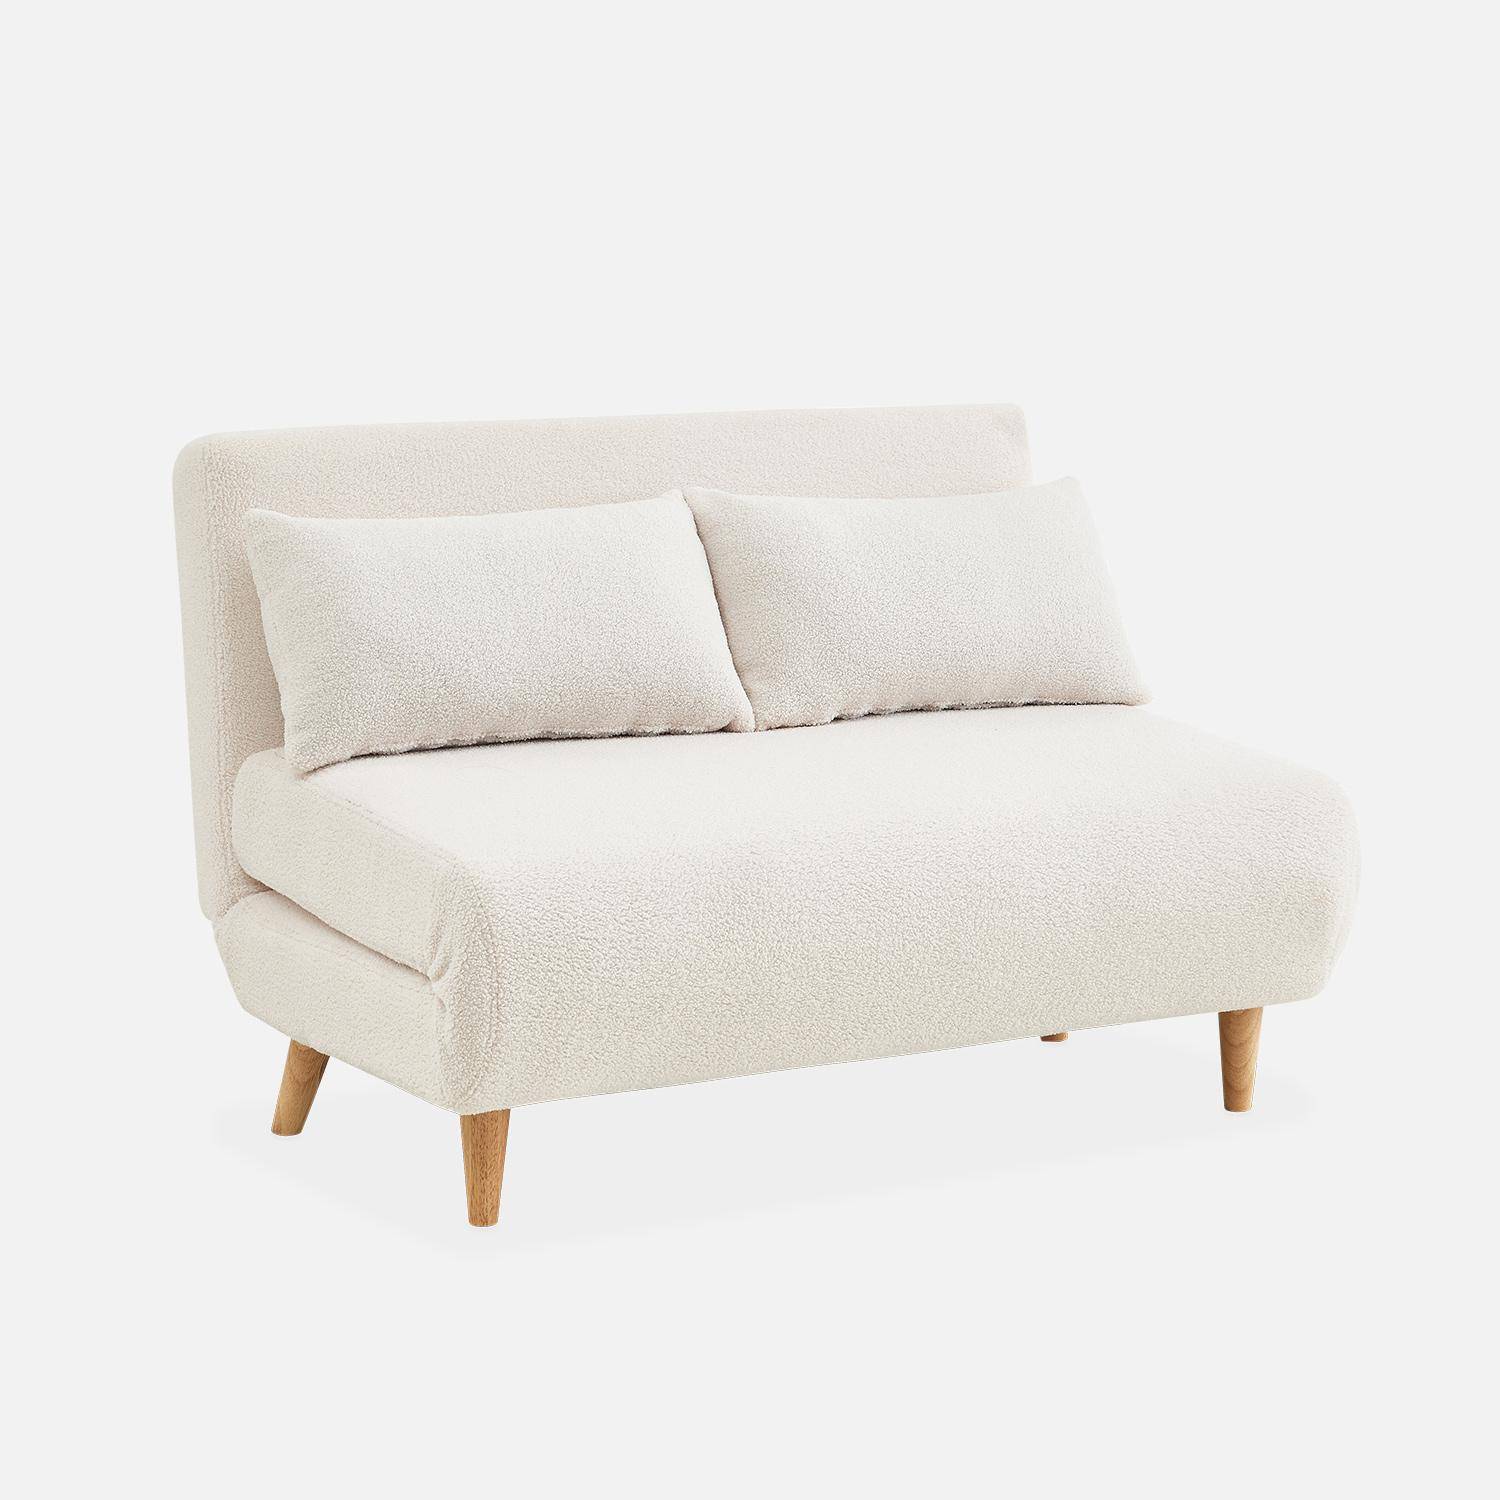 Sleeper, 2-Seater Convertible Sofa with Wooden Legs,  L120xW81xH82cm, white bouclette Photo3